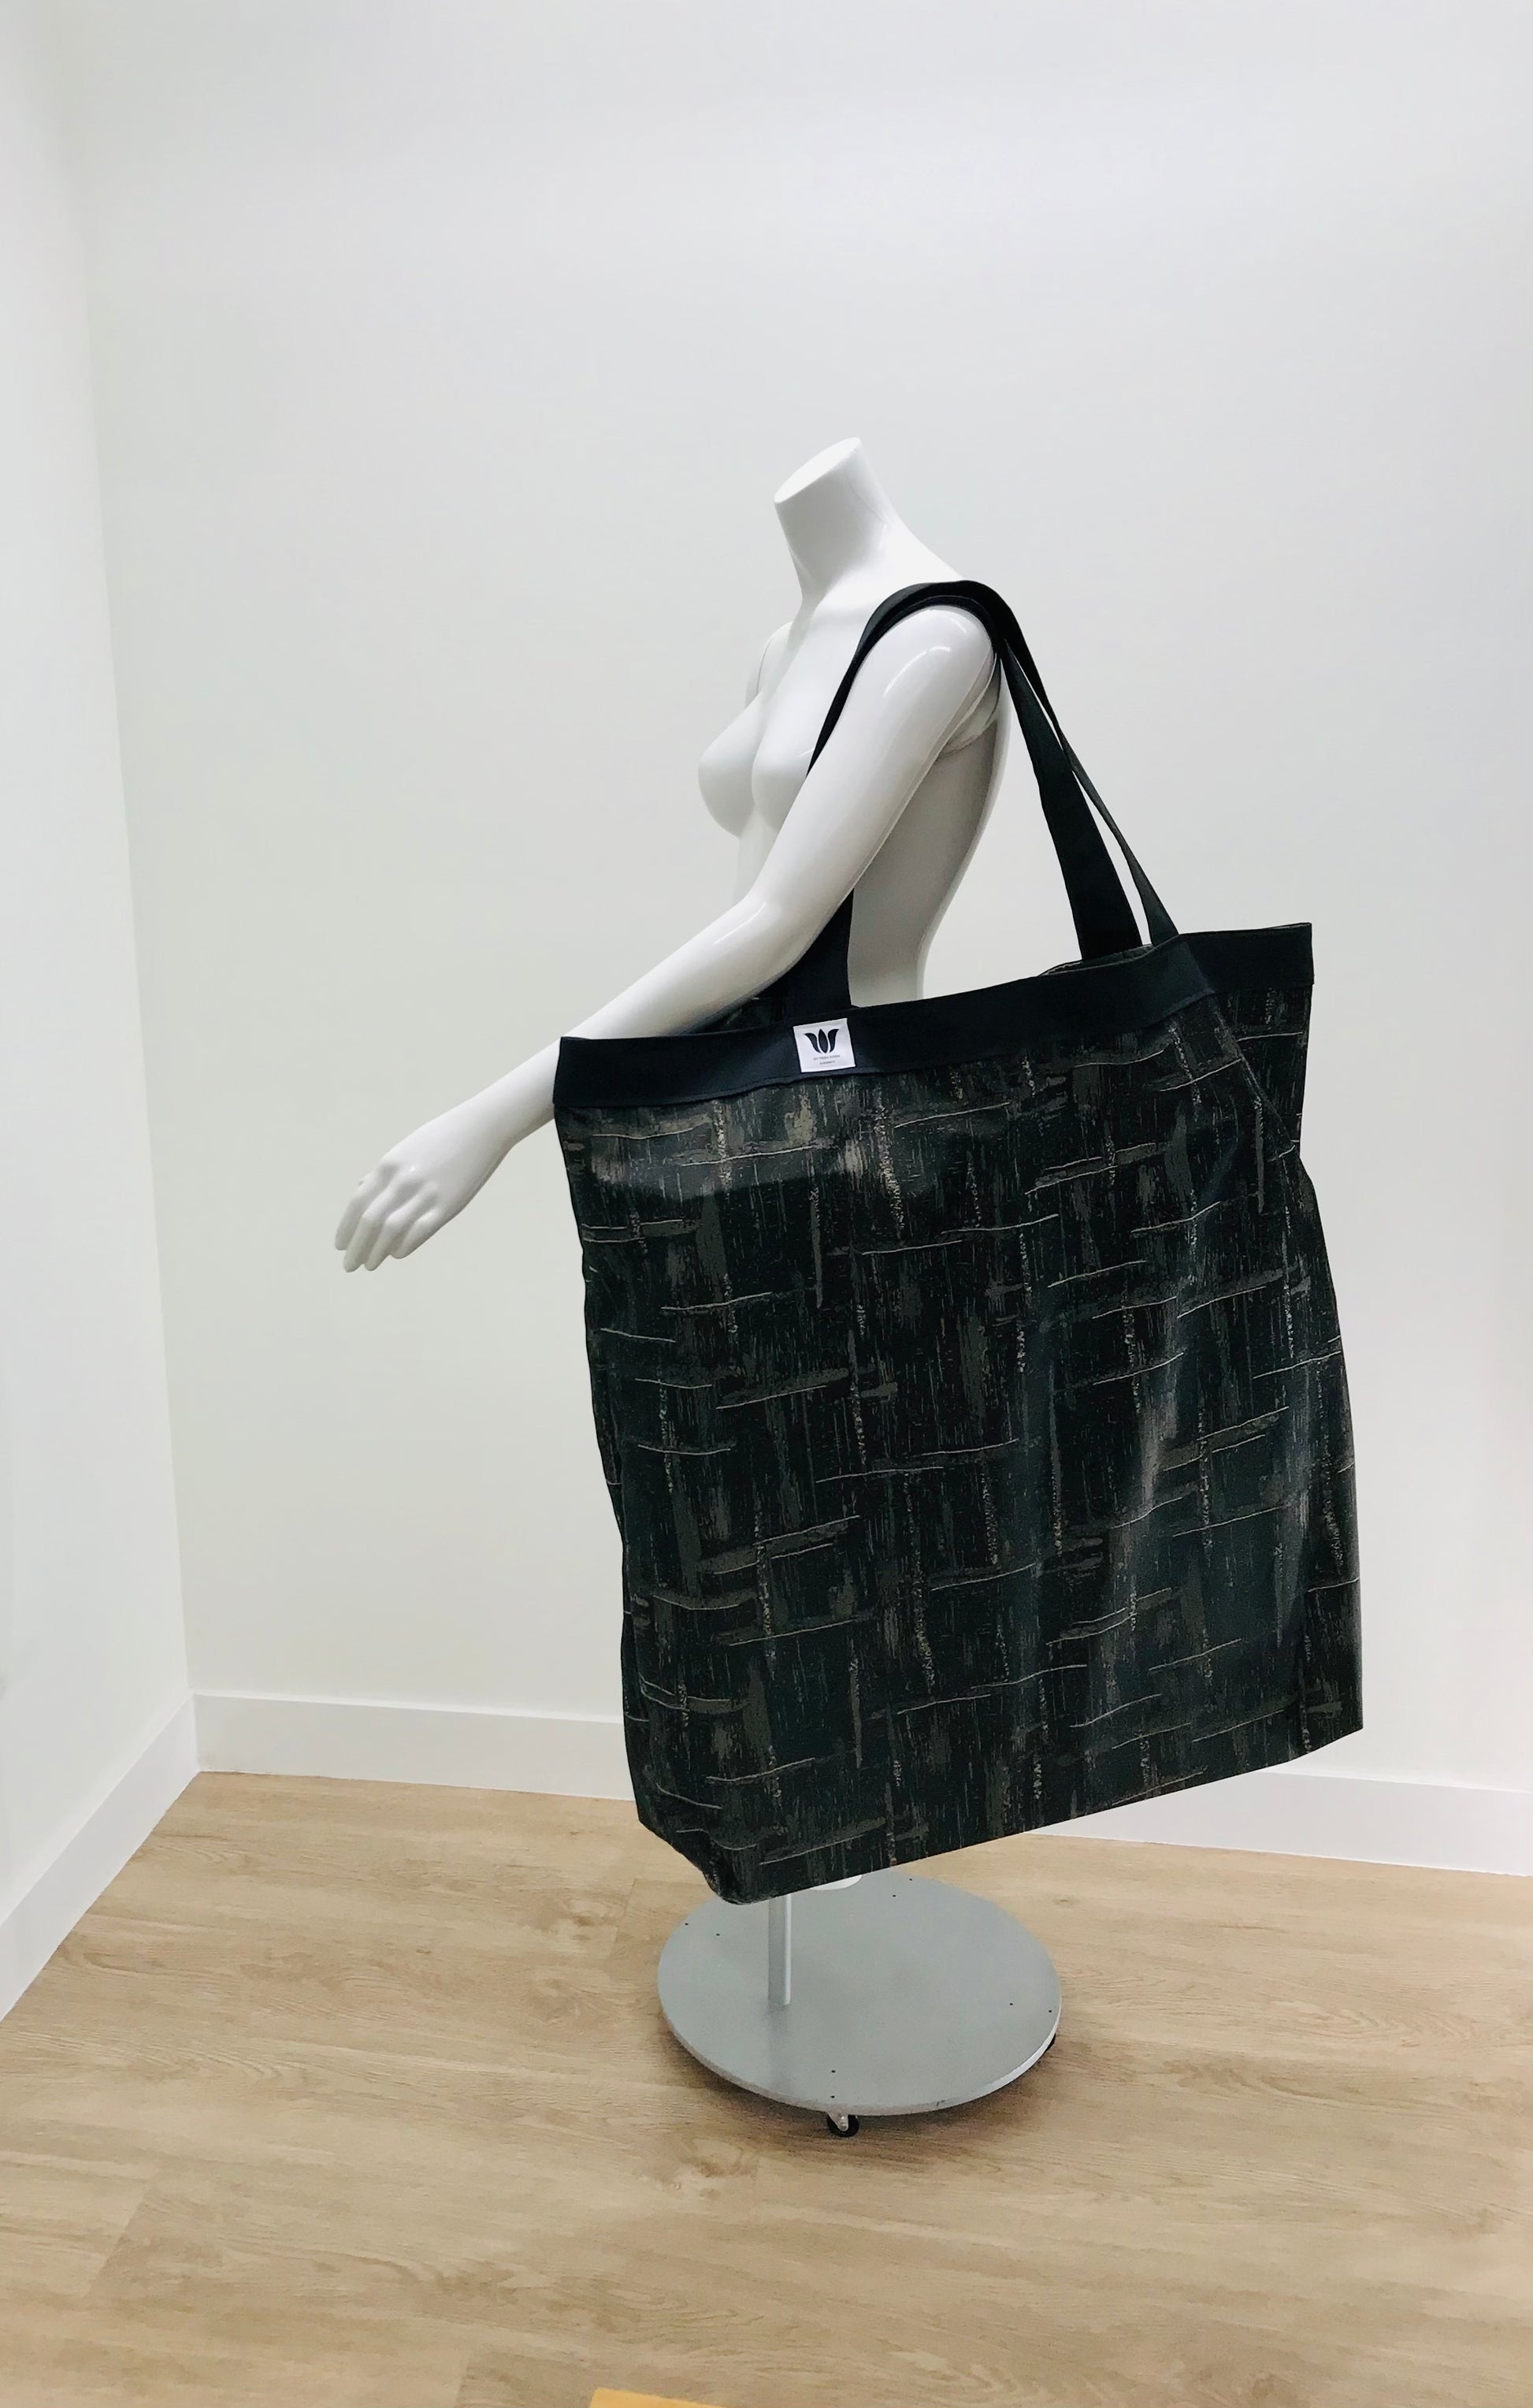 Made in Canada, Large Yoga Tote to carry all your yoga props in one bag